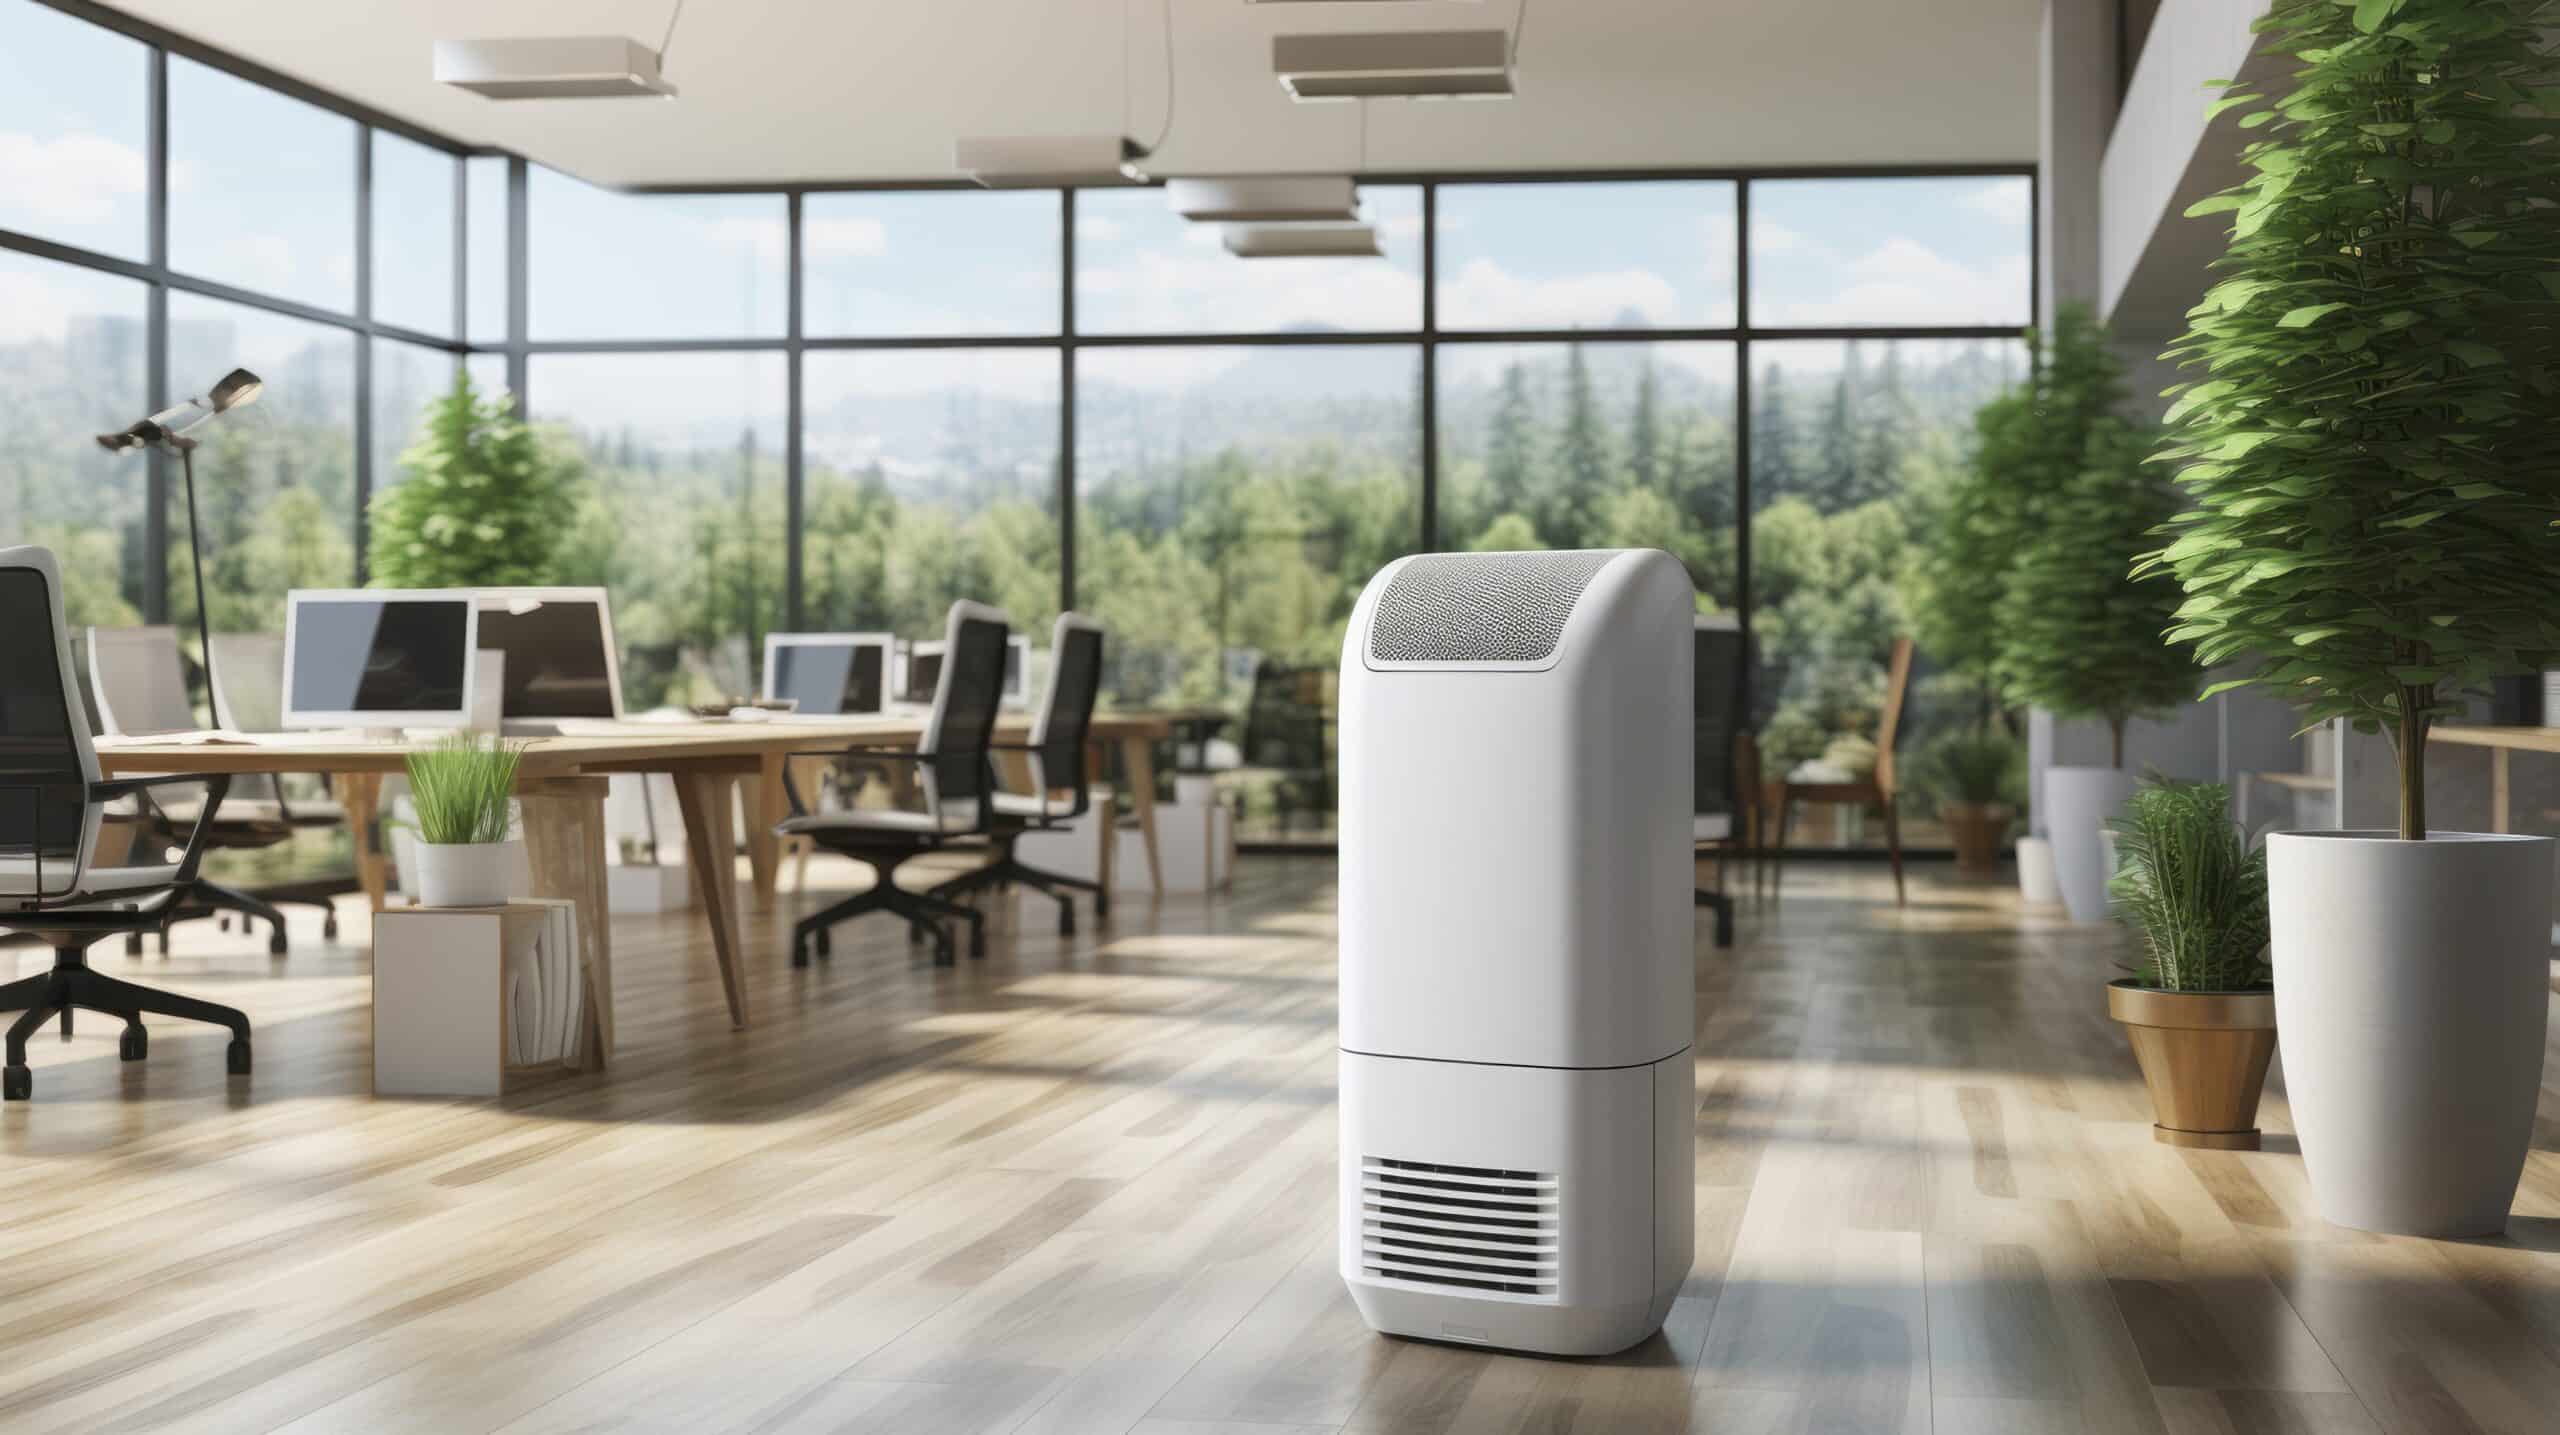 www.appr.com : How can I determine the right size of air purifier for my home?